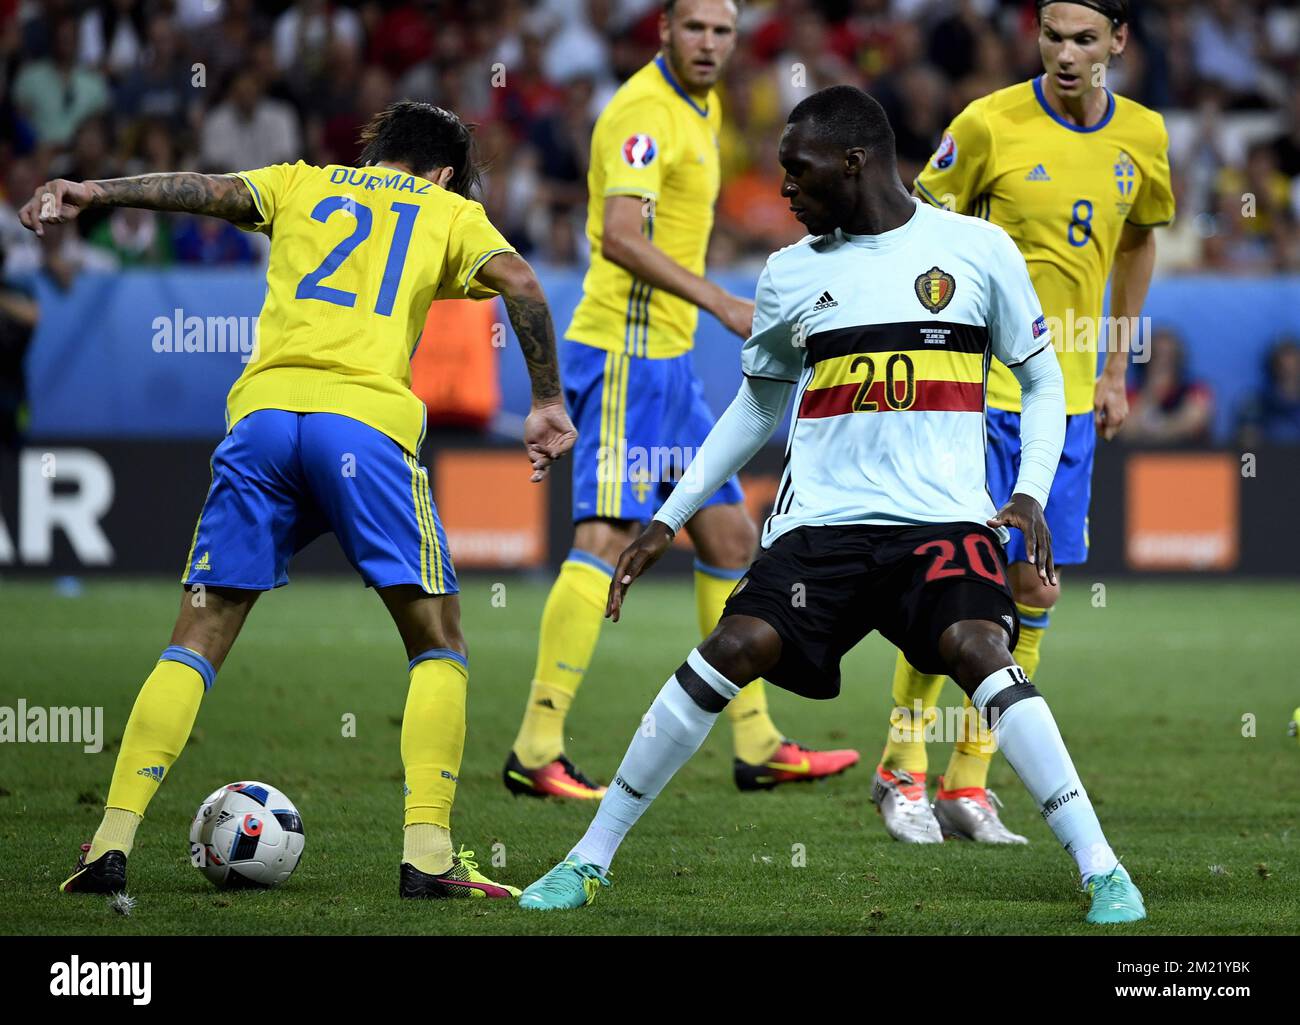 Sweden's Jimmy Durmaz and Belgium's Christian Benteke fight for the ball during a soccer game between Belgian national soccer team Red Devils and Sweden, in group E of the group stage of the UEFA Euro 2016 European Championships, on Wednesday 22 June 2016, in Nice, France.  Stock Photo